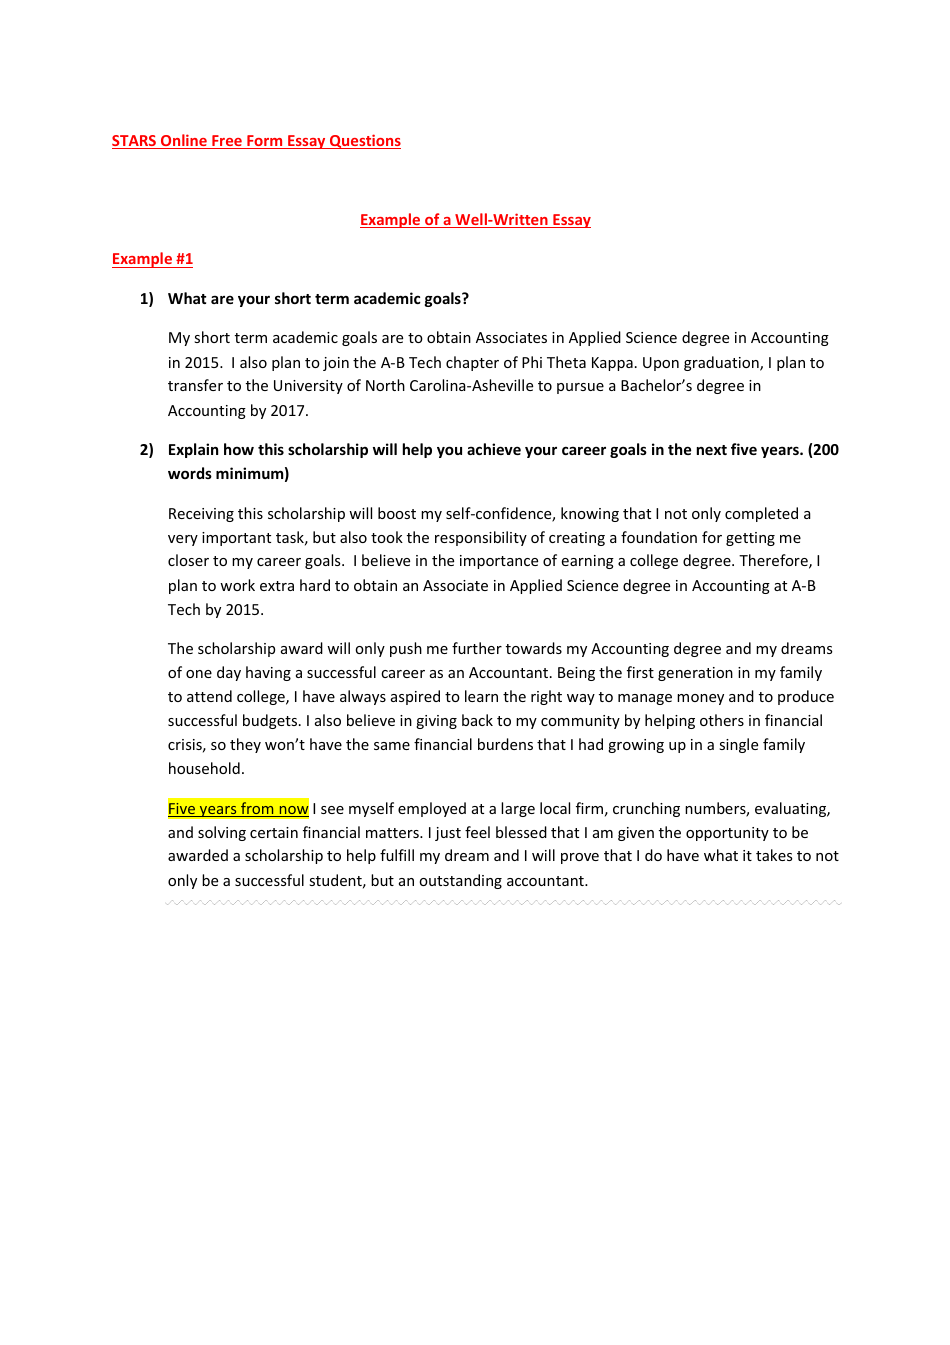 Example of a Well-Written Essay - Asheville-Buncombe Technical Community College, Page 1